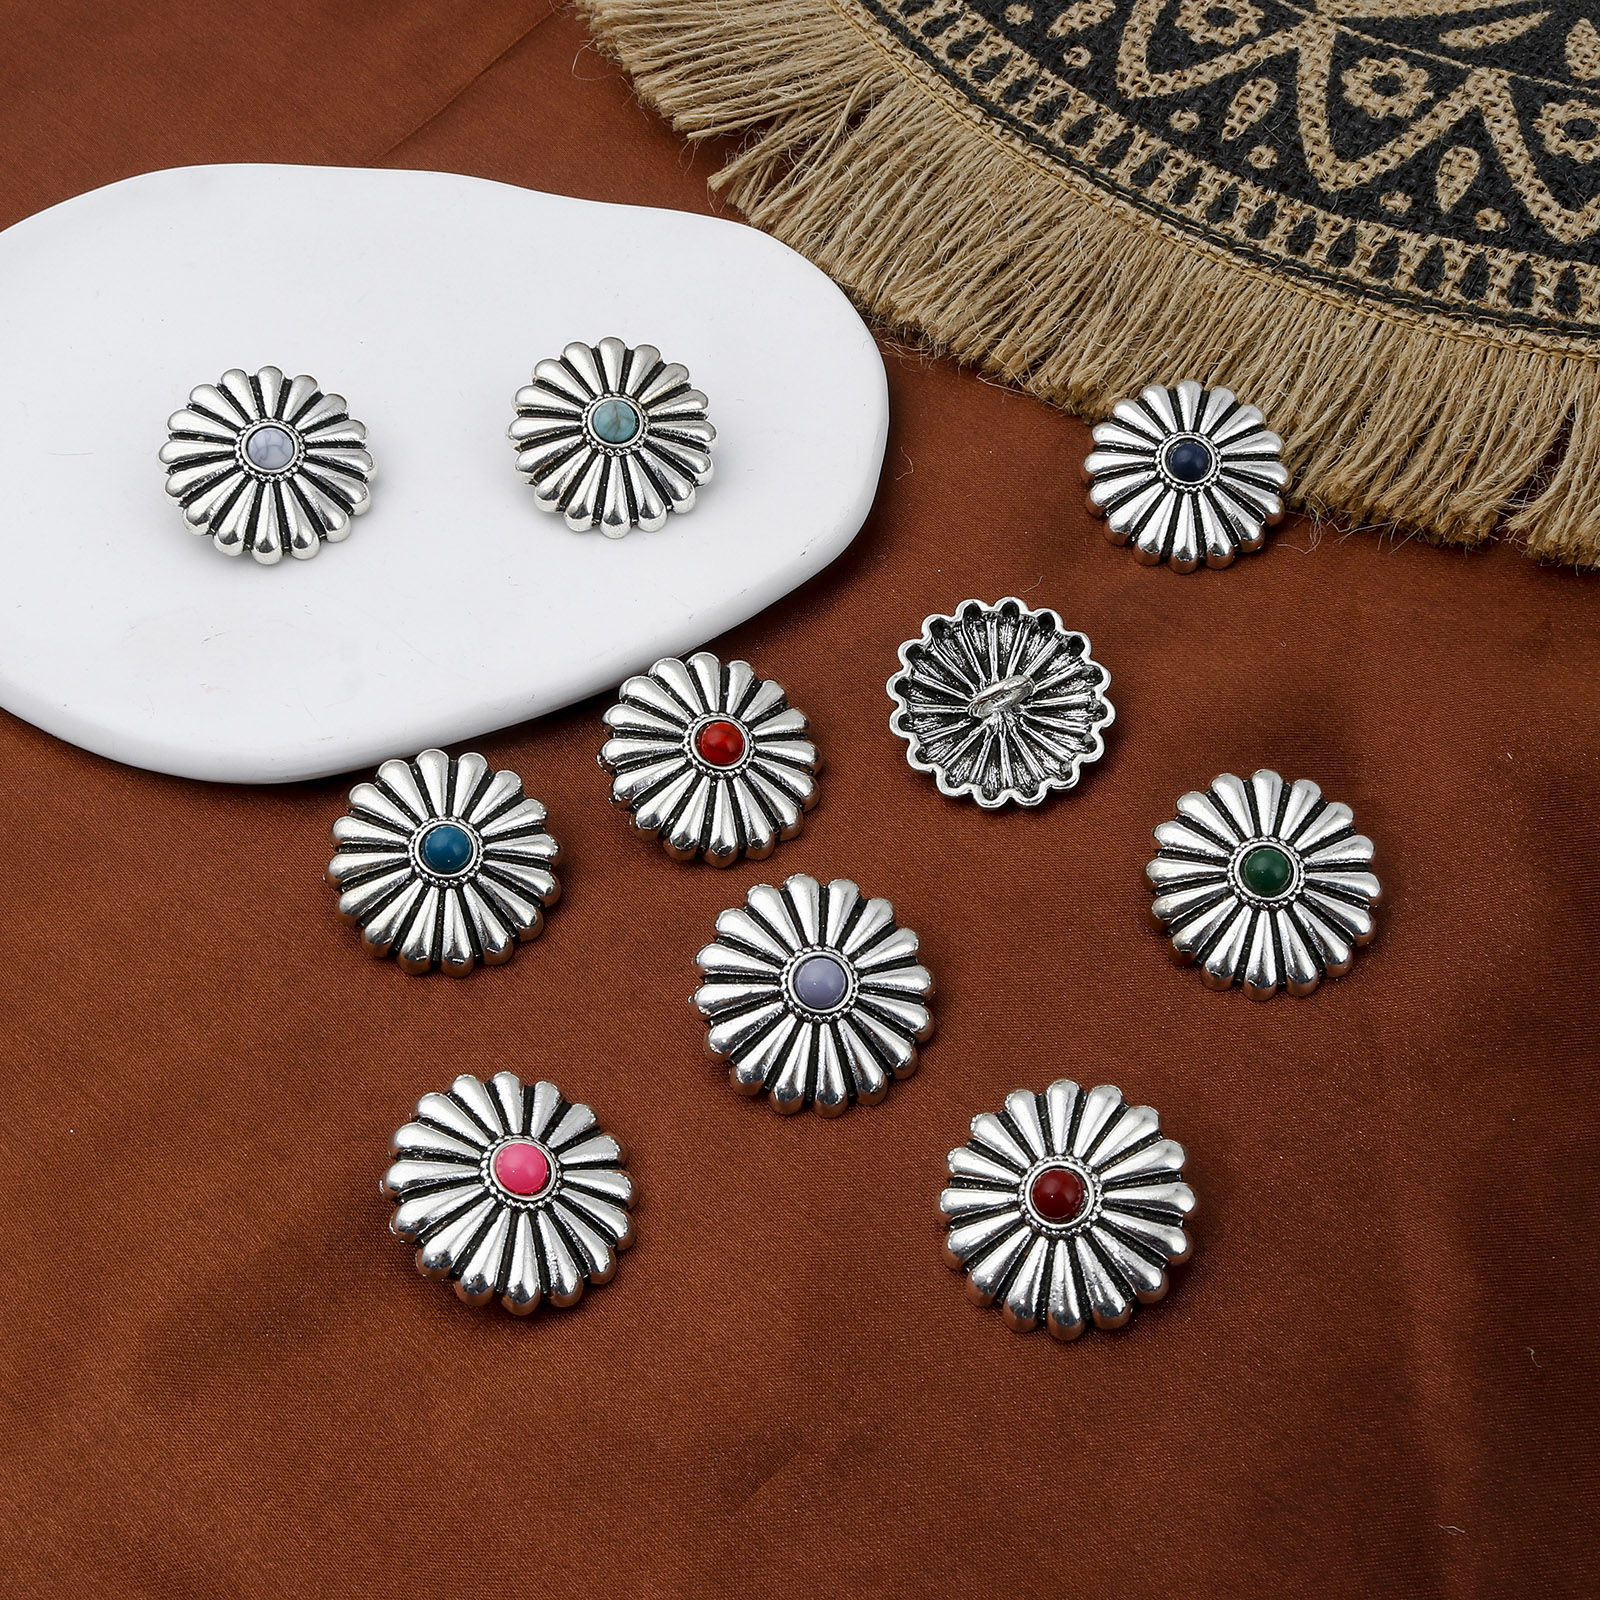 Image de Zinc Based Alloy Boho Chic Bohemia Metal Sewing Shank Buttons Buttons Single Hole Flower Leaves Antique Silver Color Multicolor With Resin Cabochons Imitation Turquoise 29mm x 29mm, 3 PCs